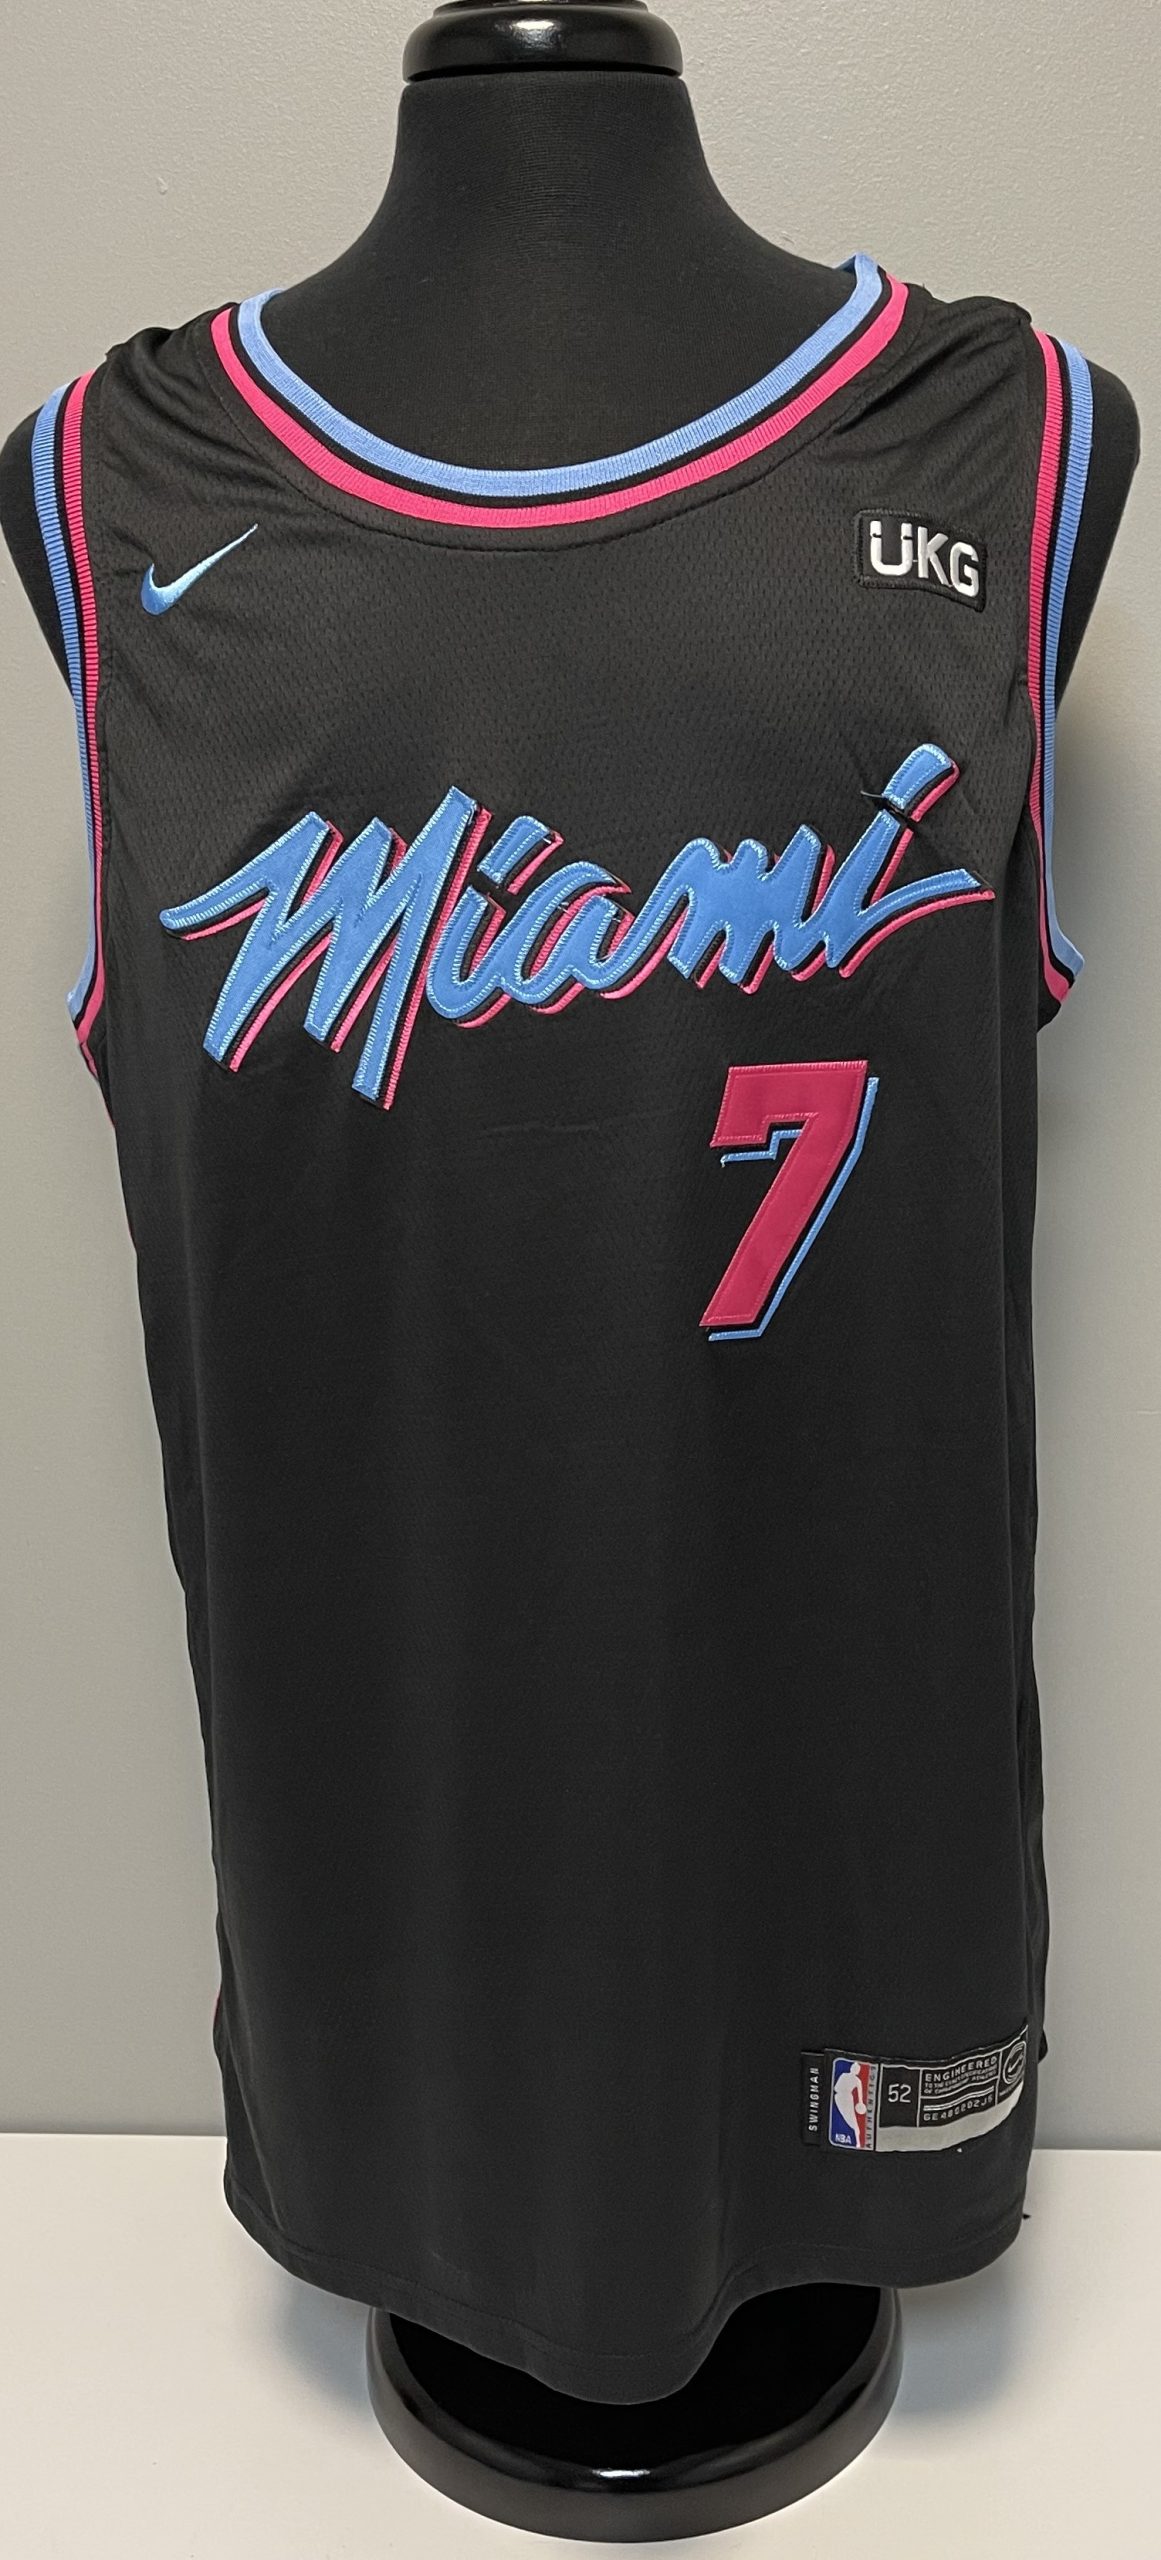 Kyle Lowry Signed Miami Heat Jersey Size L In Person JSA CERTIFIED